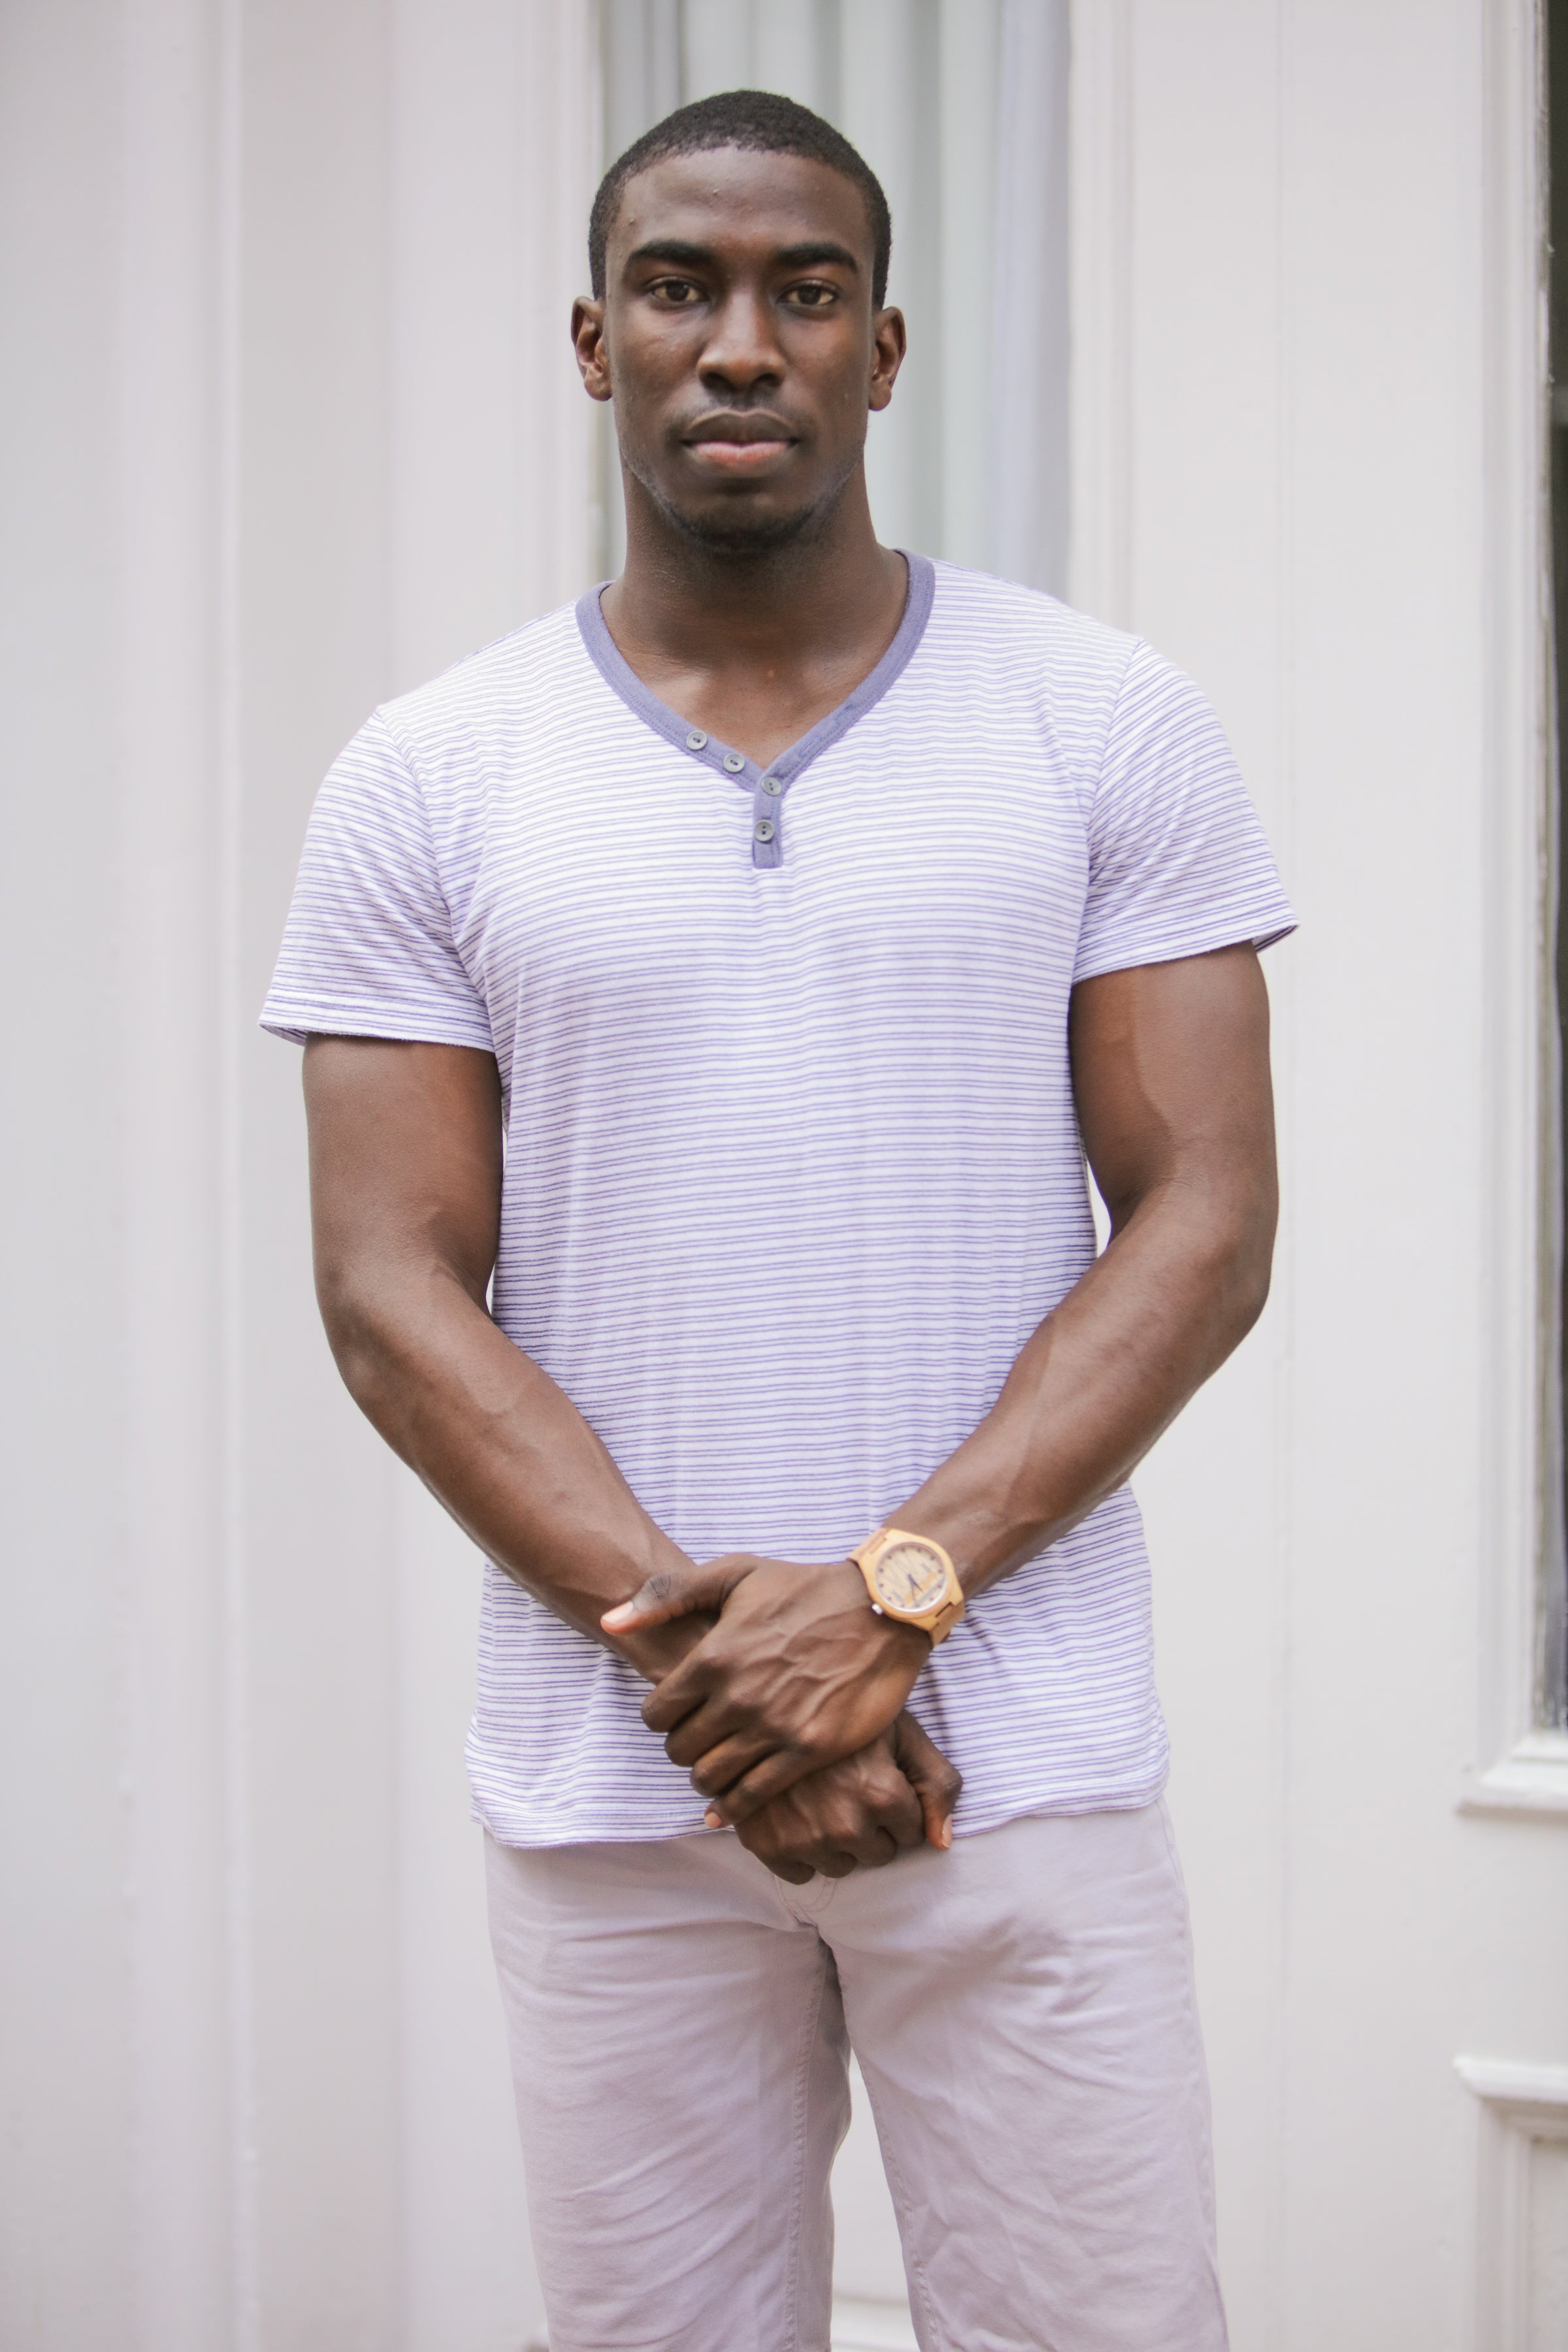 ESSENCE Fest Eye Candy Baby! Meet All of the Sexy Men We Spotted In NOLA
